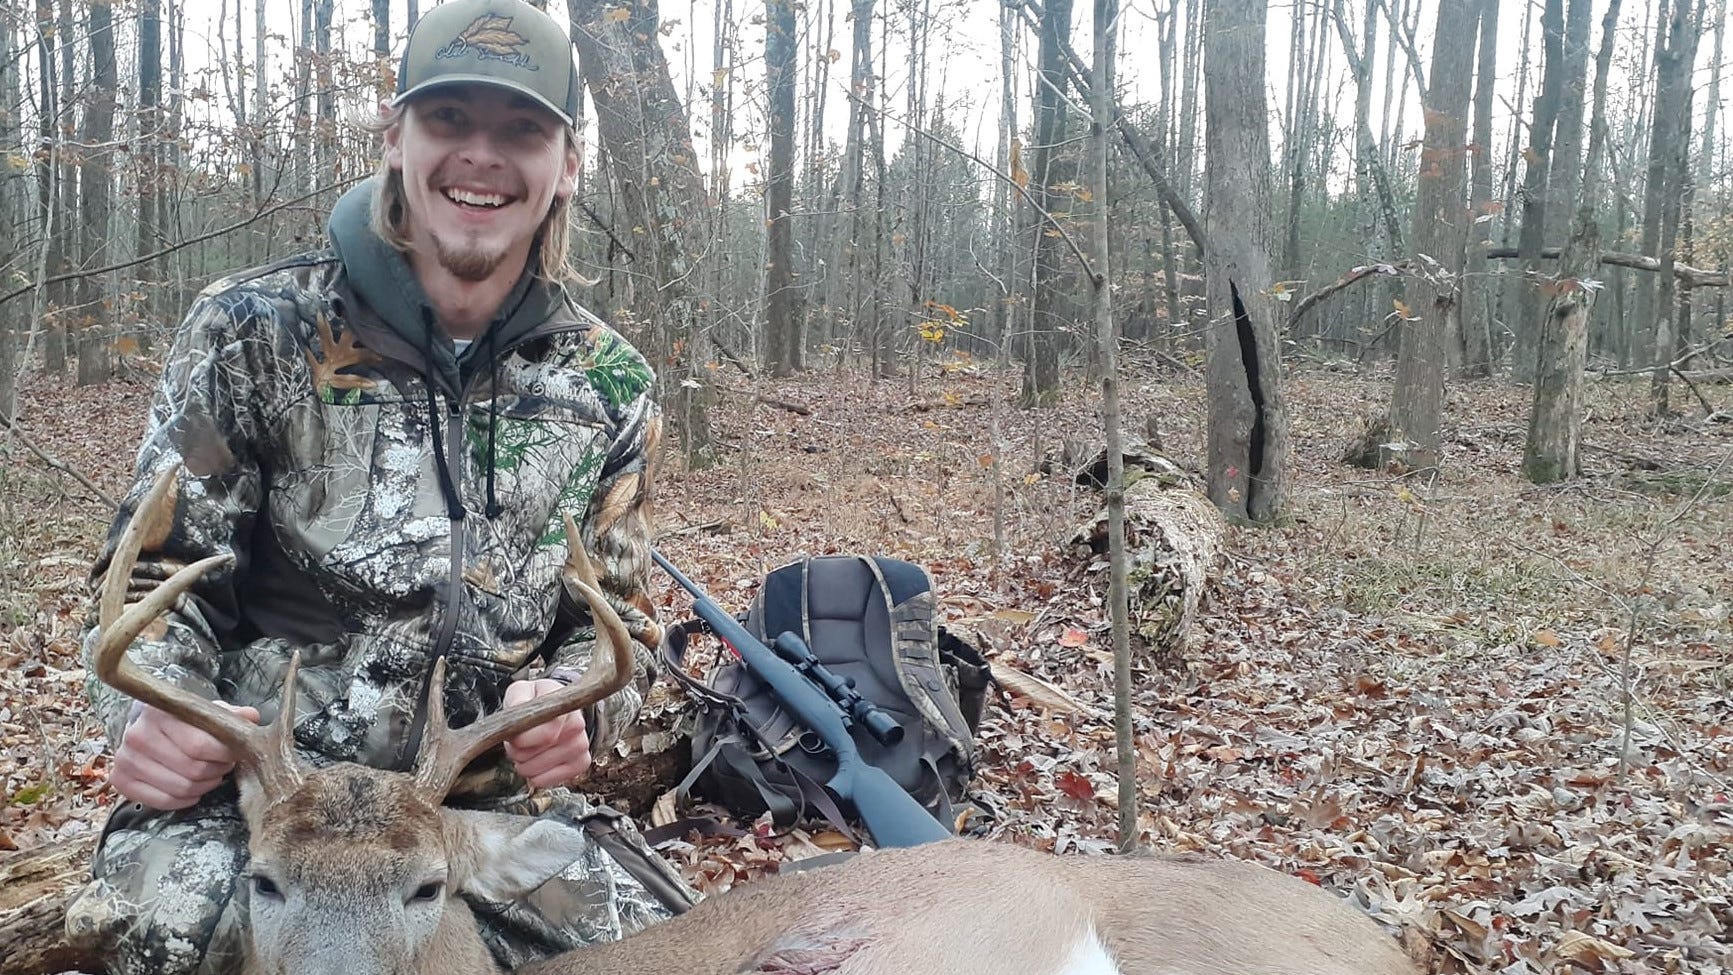 Harvest for opening weekend of deer hunting in Tennessee up this year